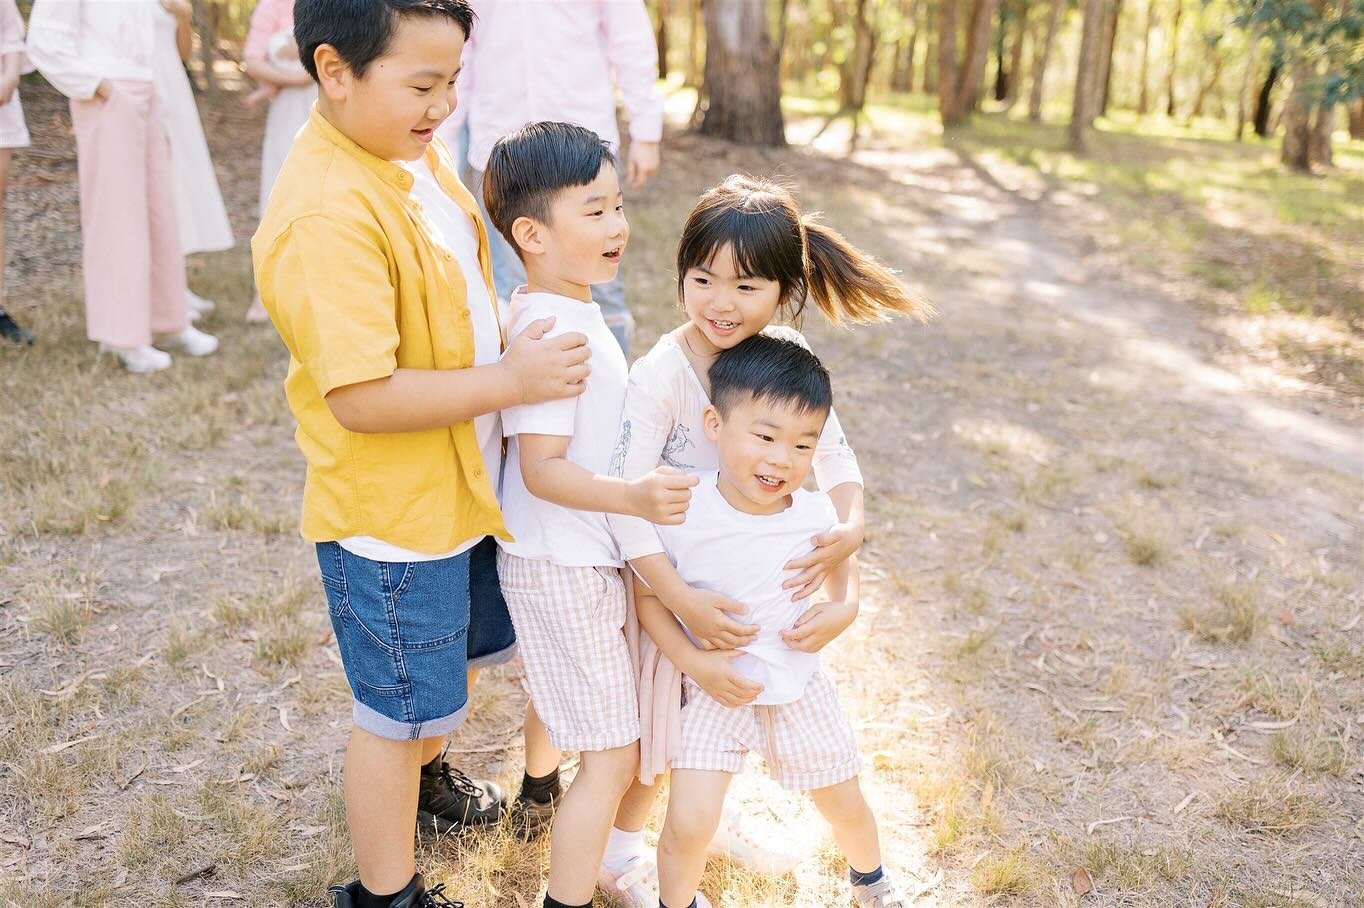 For extended family session, there are many family groups, and each bring their own energy. It can feel quite chaotic especially if it&rsquo;s a big group. It can feel like hard work, getting everyone together. 

I hear you. I understand that it&rsqu